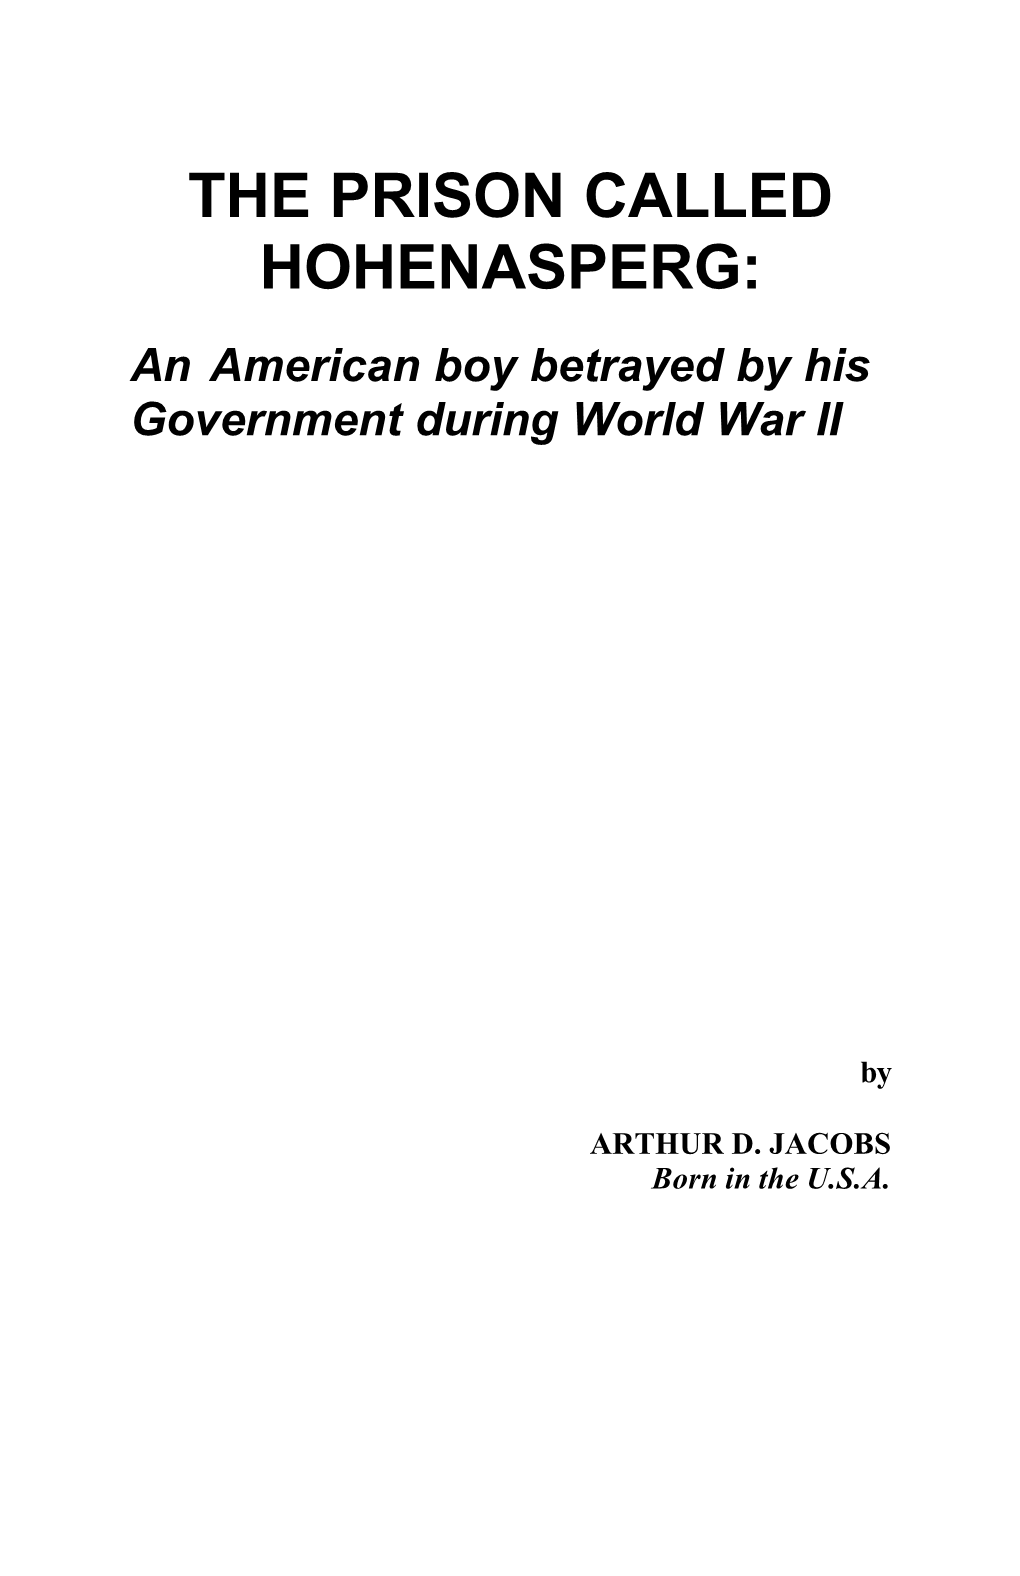 THE PRISON CALLED HOHENASPERG: an American Boy Betrayed by His Government During World War II